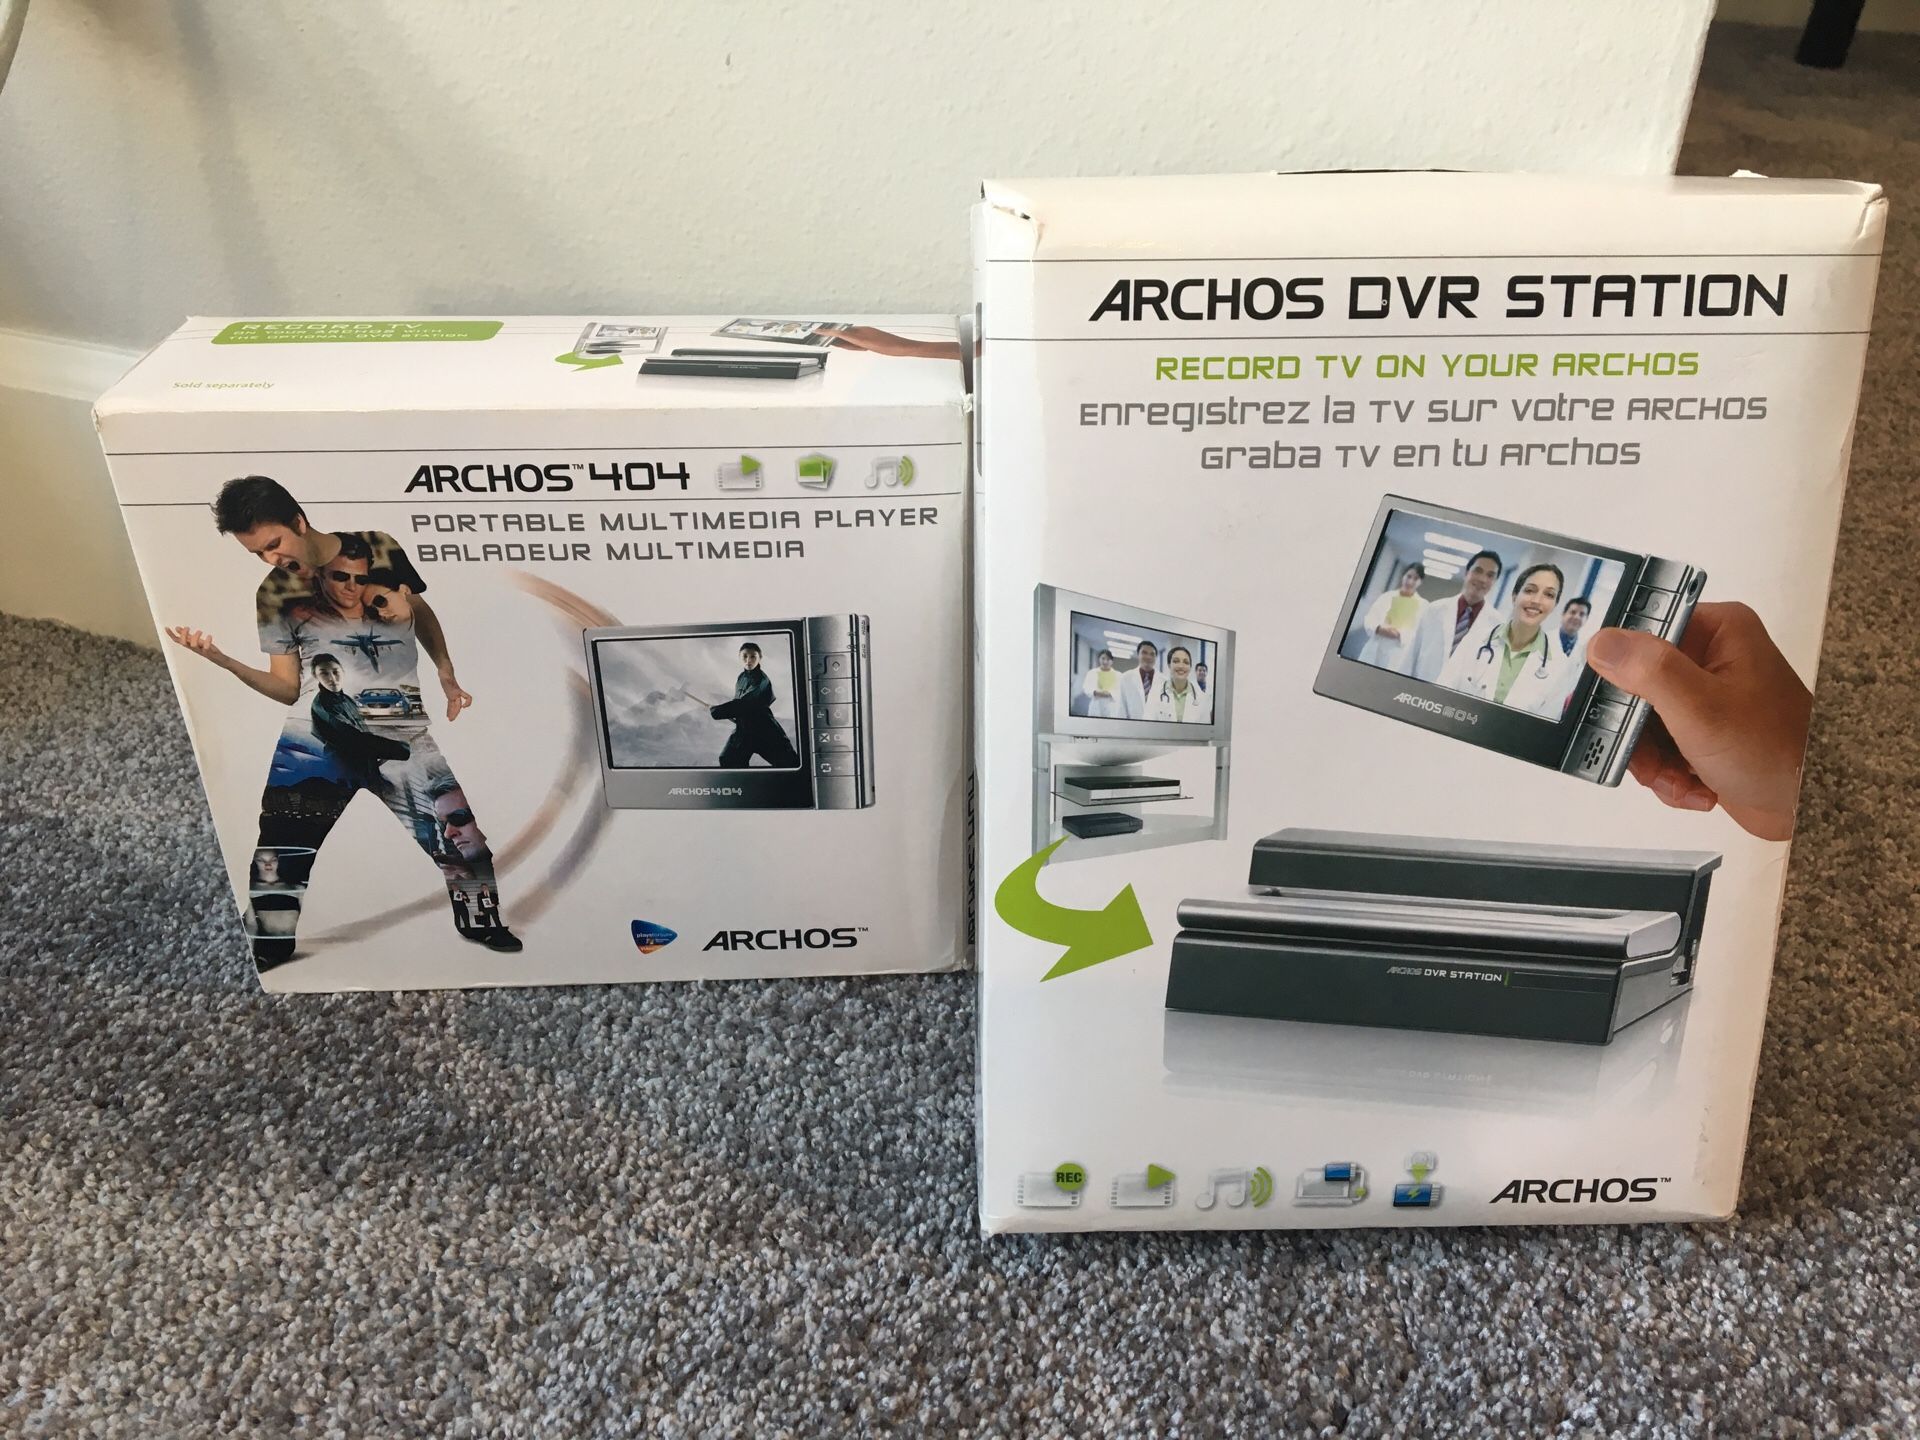 Archos 404 Portable Multimedia Player and DVR Station